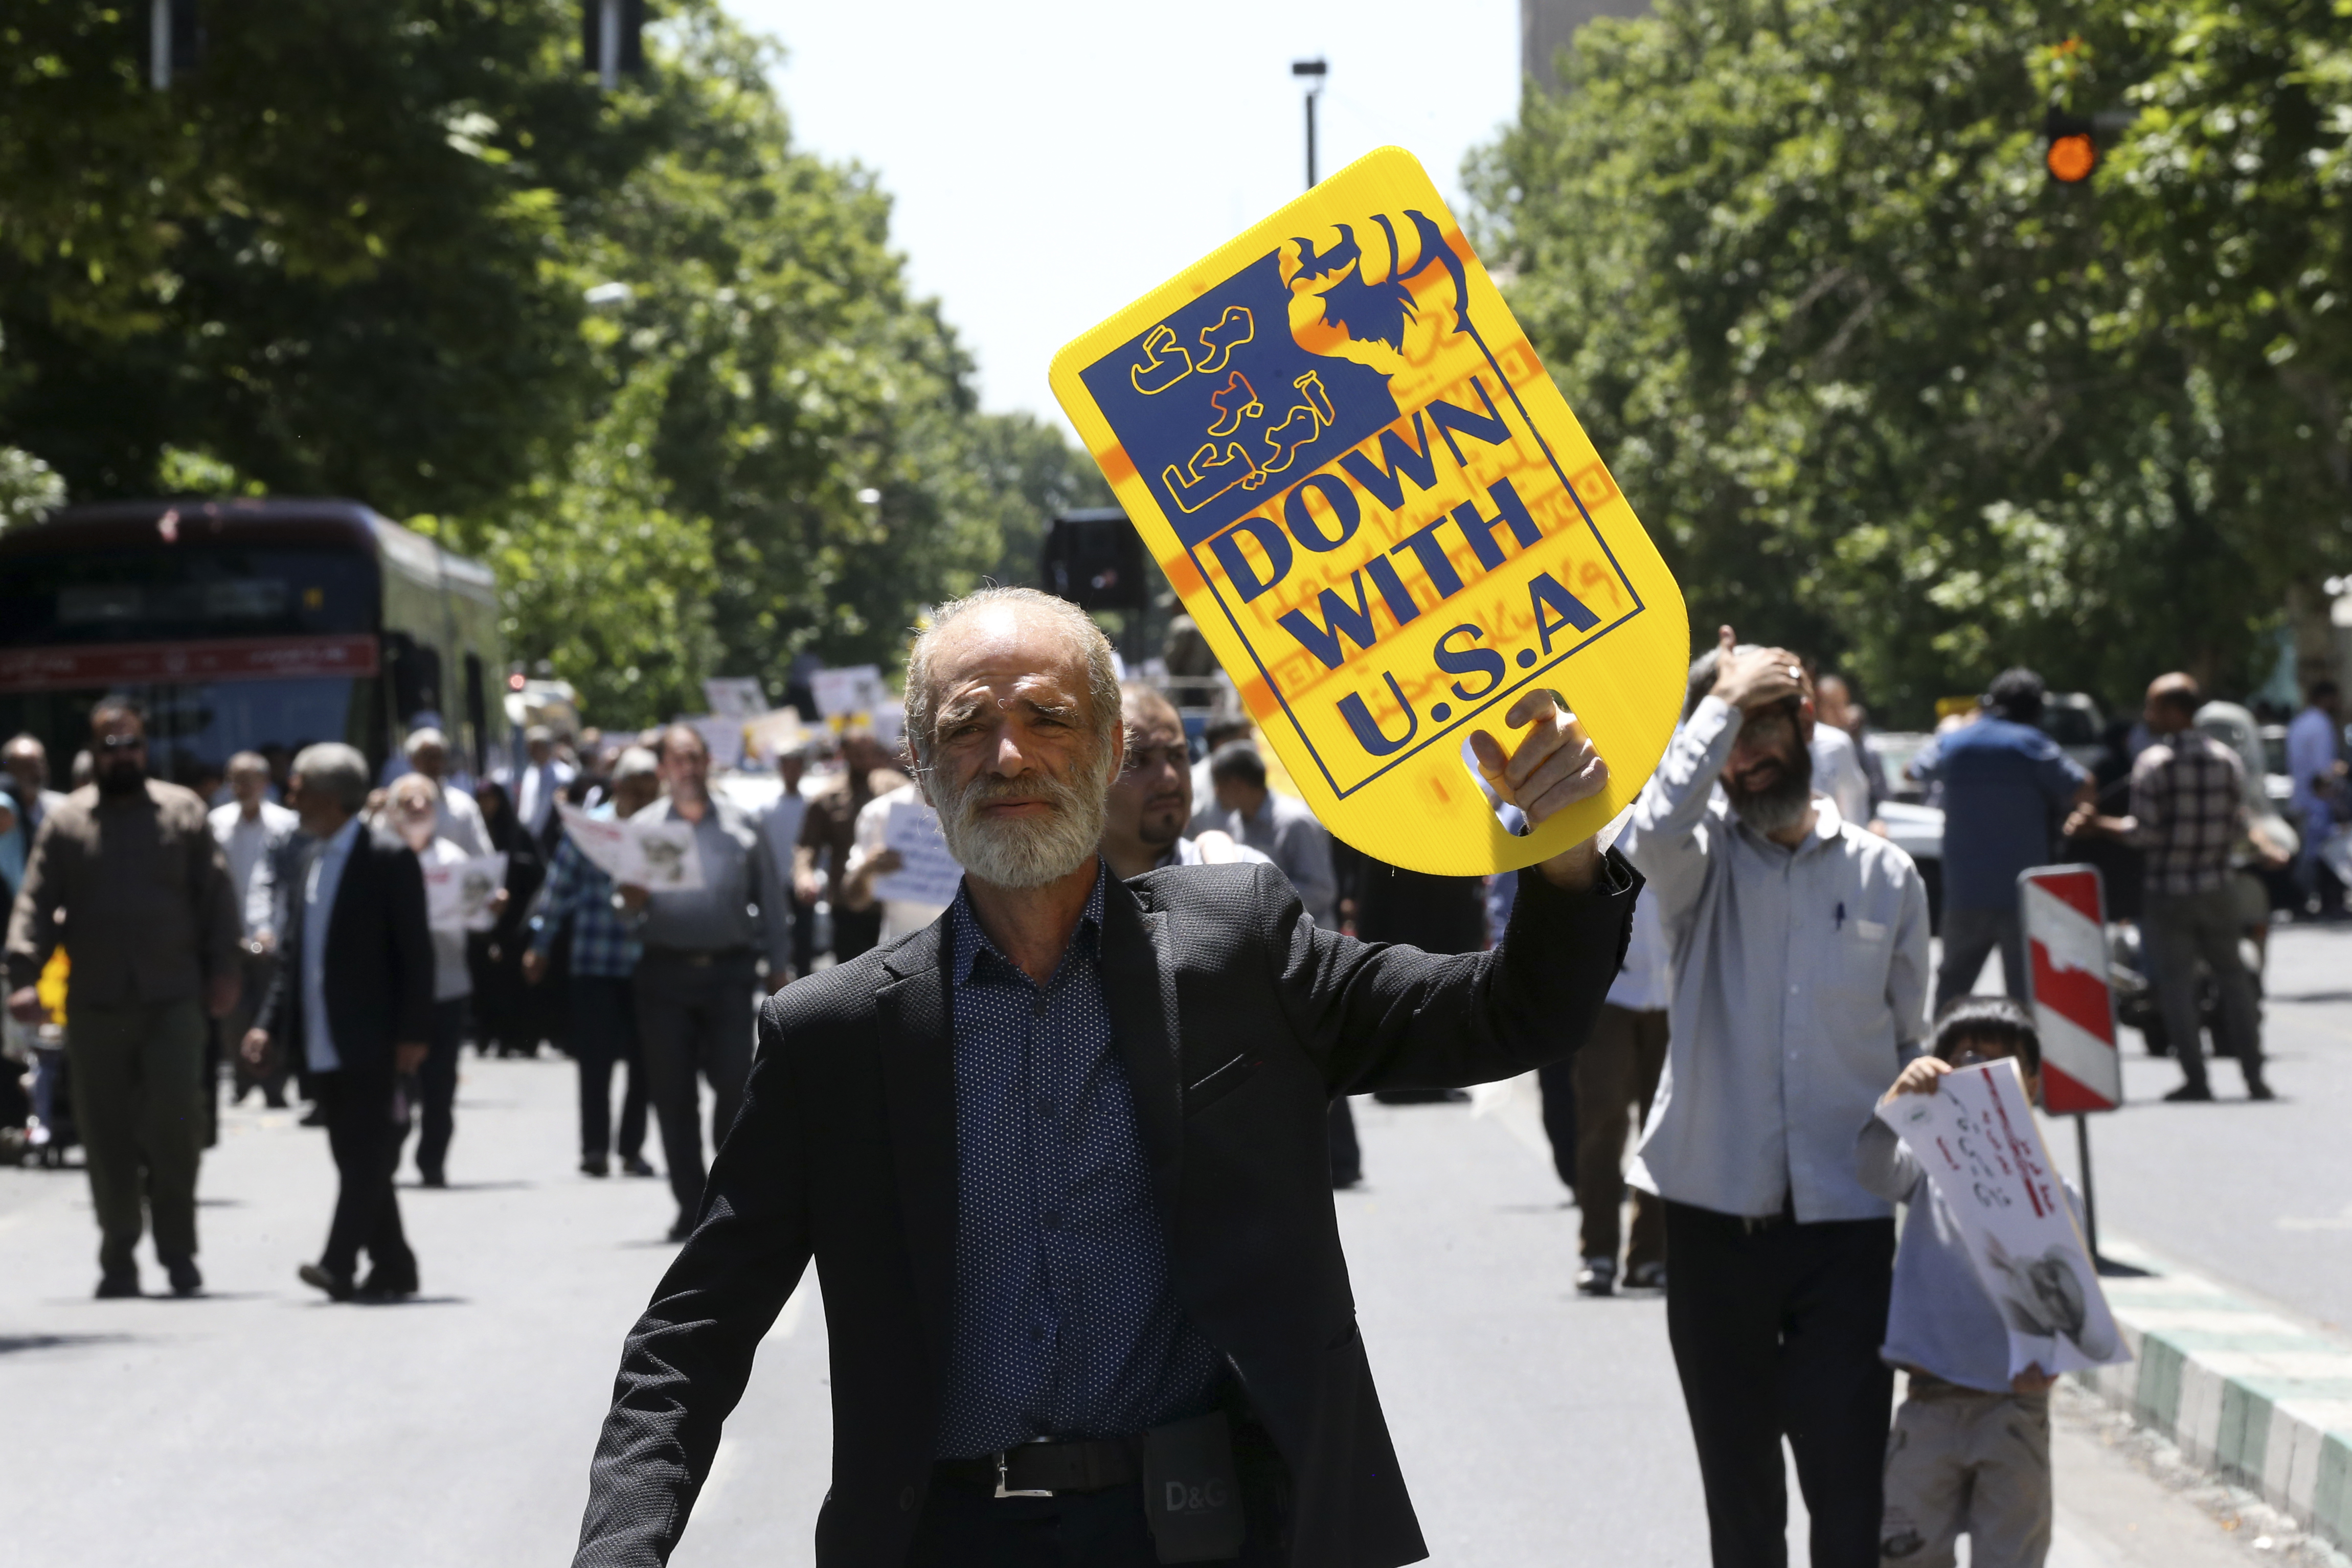 A man holds up an anti-U.S. placard during a protest against a Bahrain police raid on the hometown of Shiite cleric sheikh Isa Qassim, after Friday prayers in Tehran, Iran, 26 May 2017